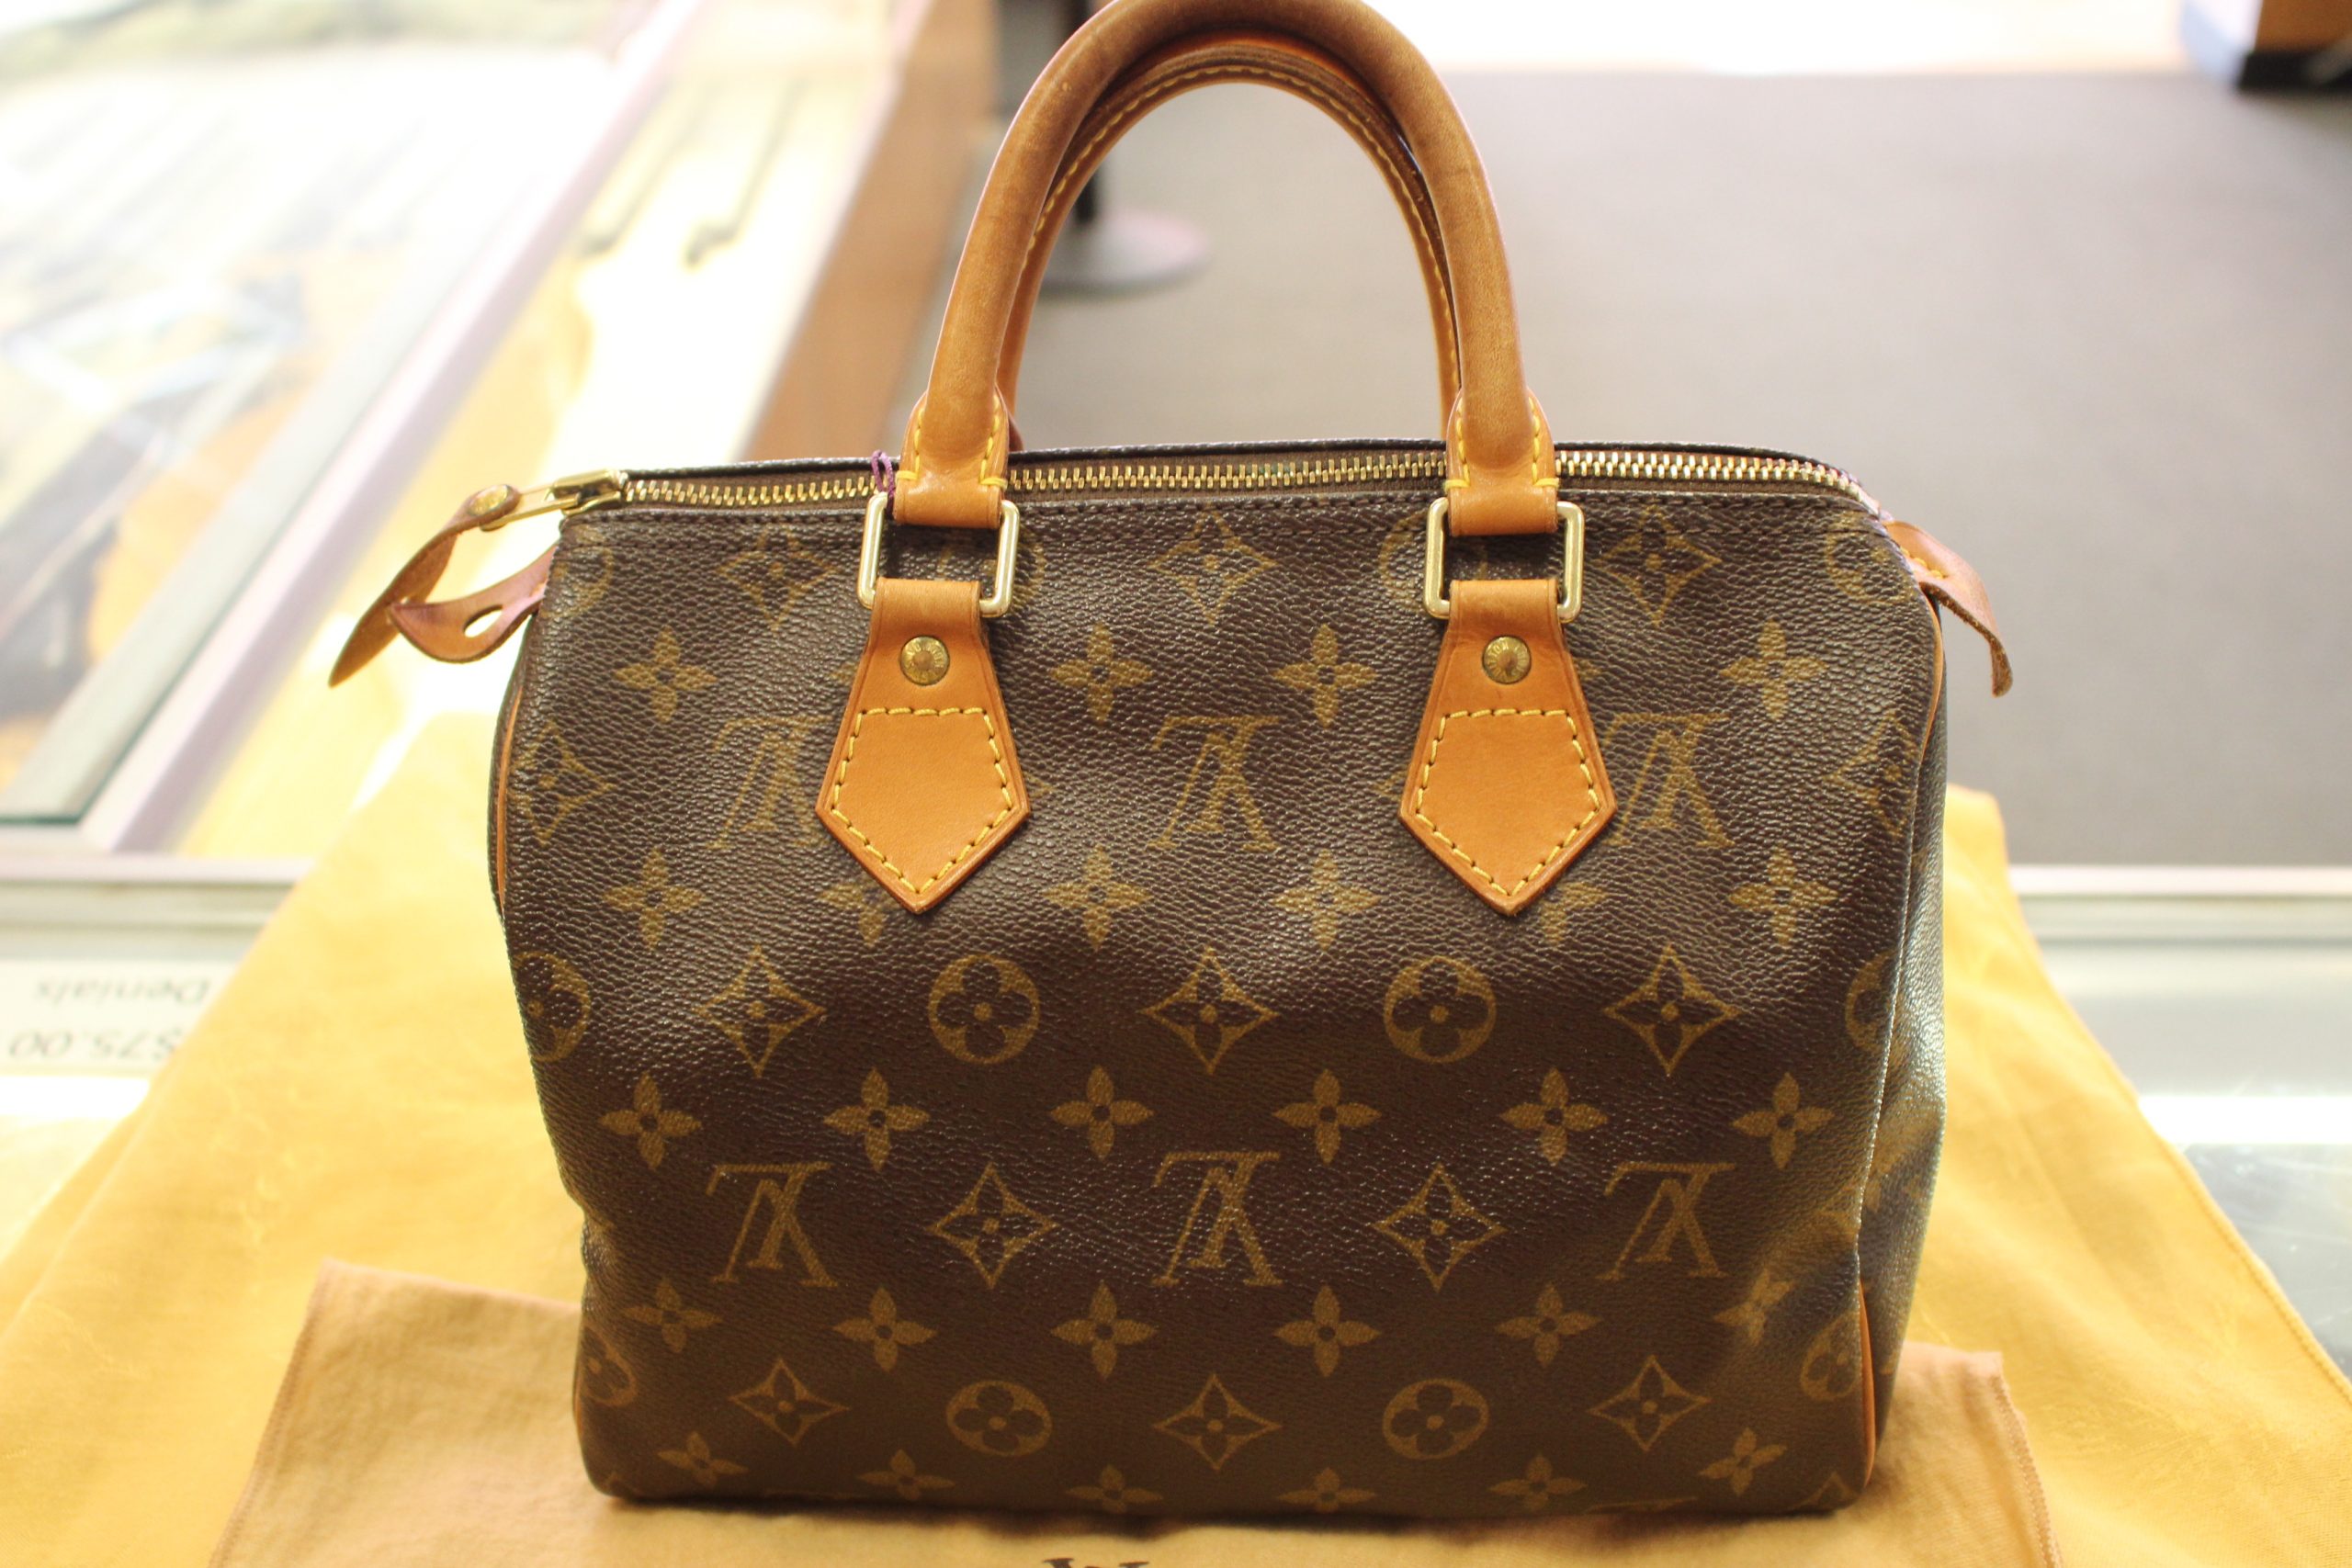 Value Of Used Louis Vuitton Purse For Sale | IQS Executive